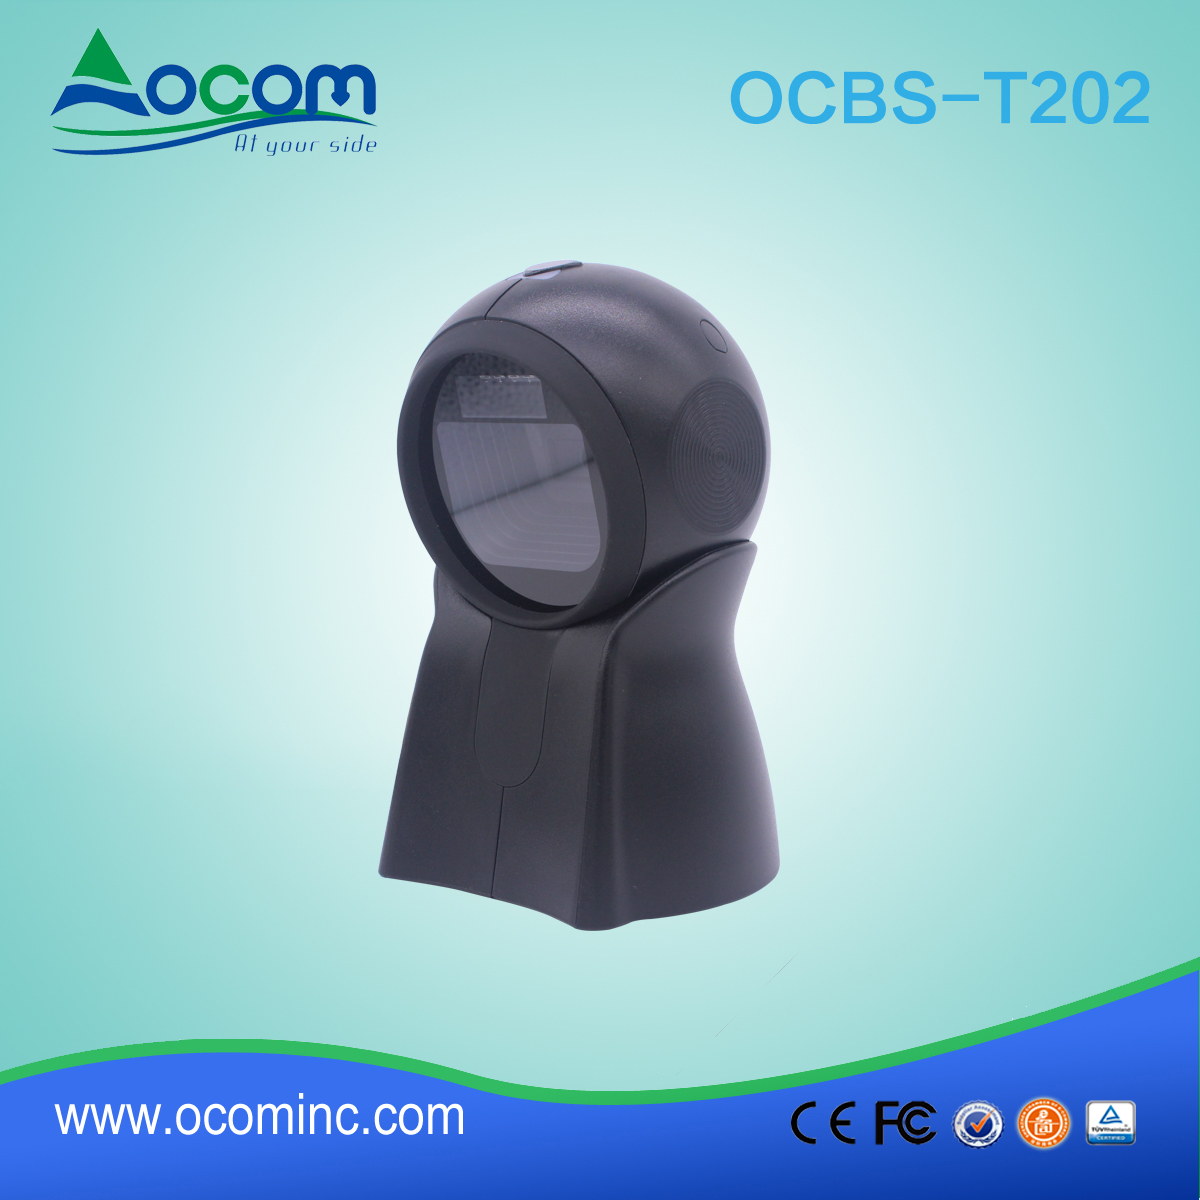 New Prodcuts OCBS-T202 Image 2D Omnidirectional Barcode Scanner